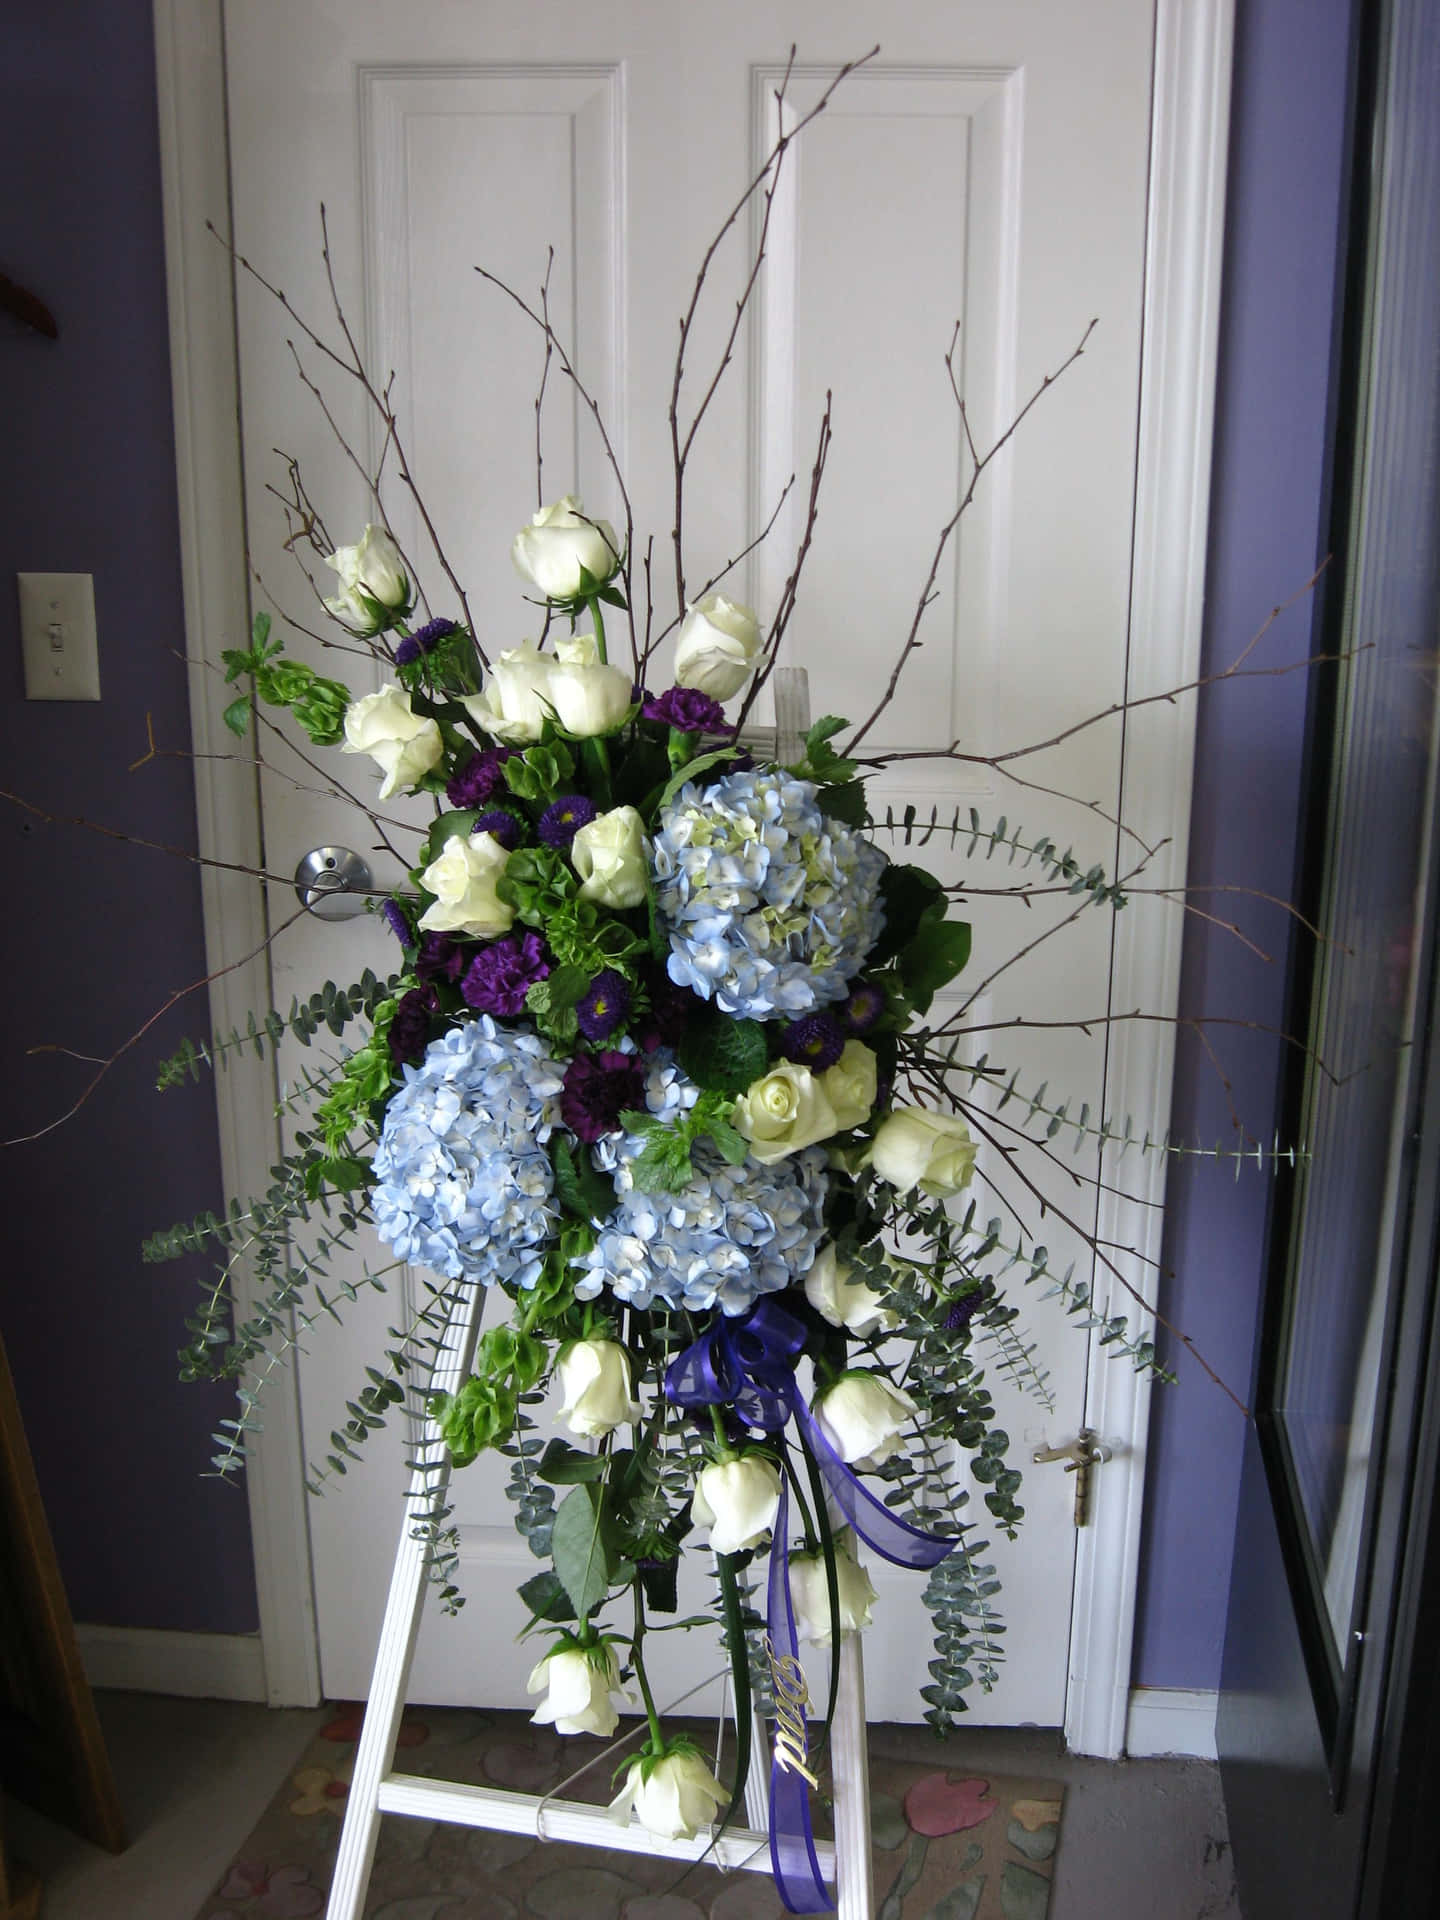 A White Door With A Wreath